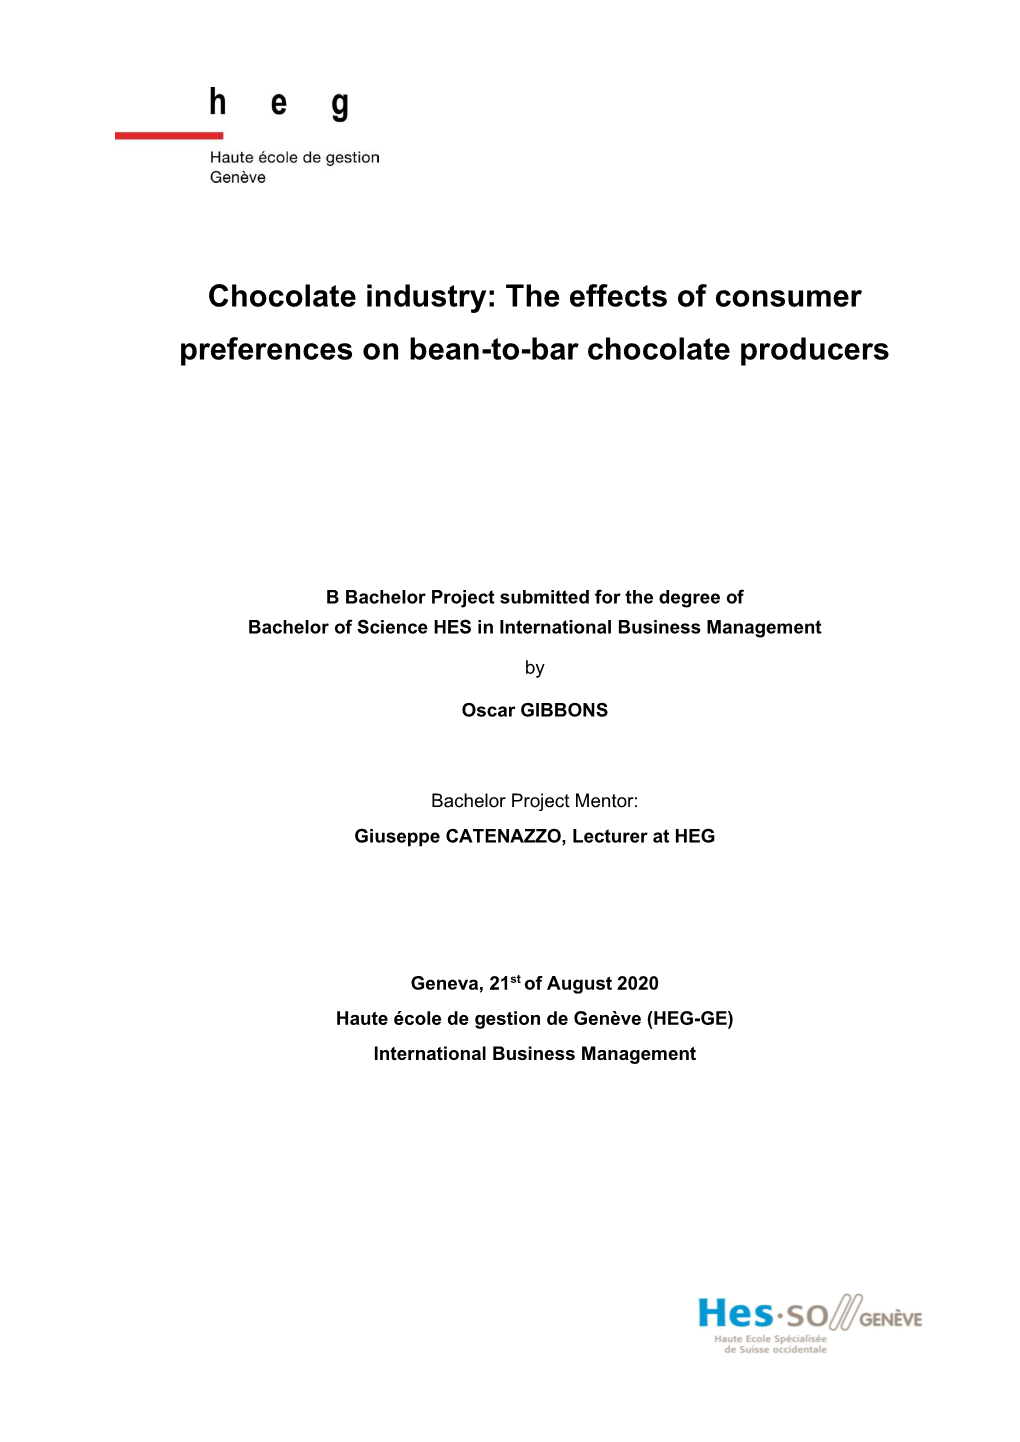 The Effects of Consumer Preferences on Bean-To-Bar Chocolate Producers